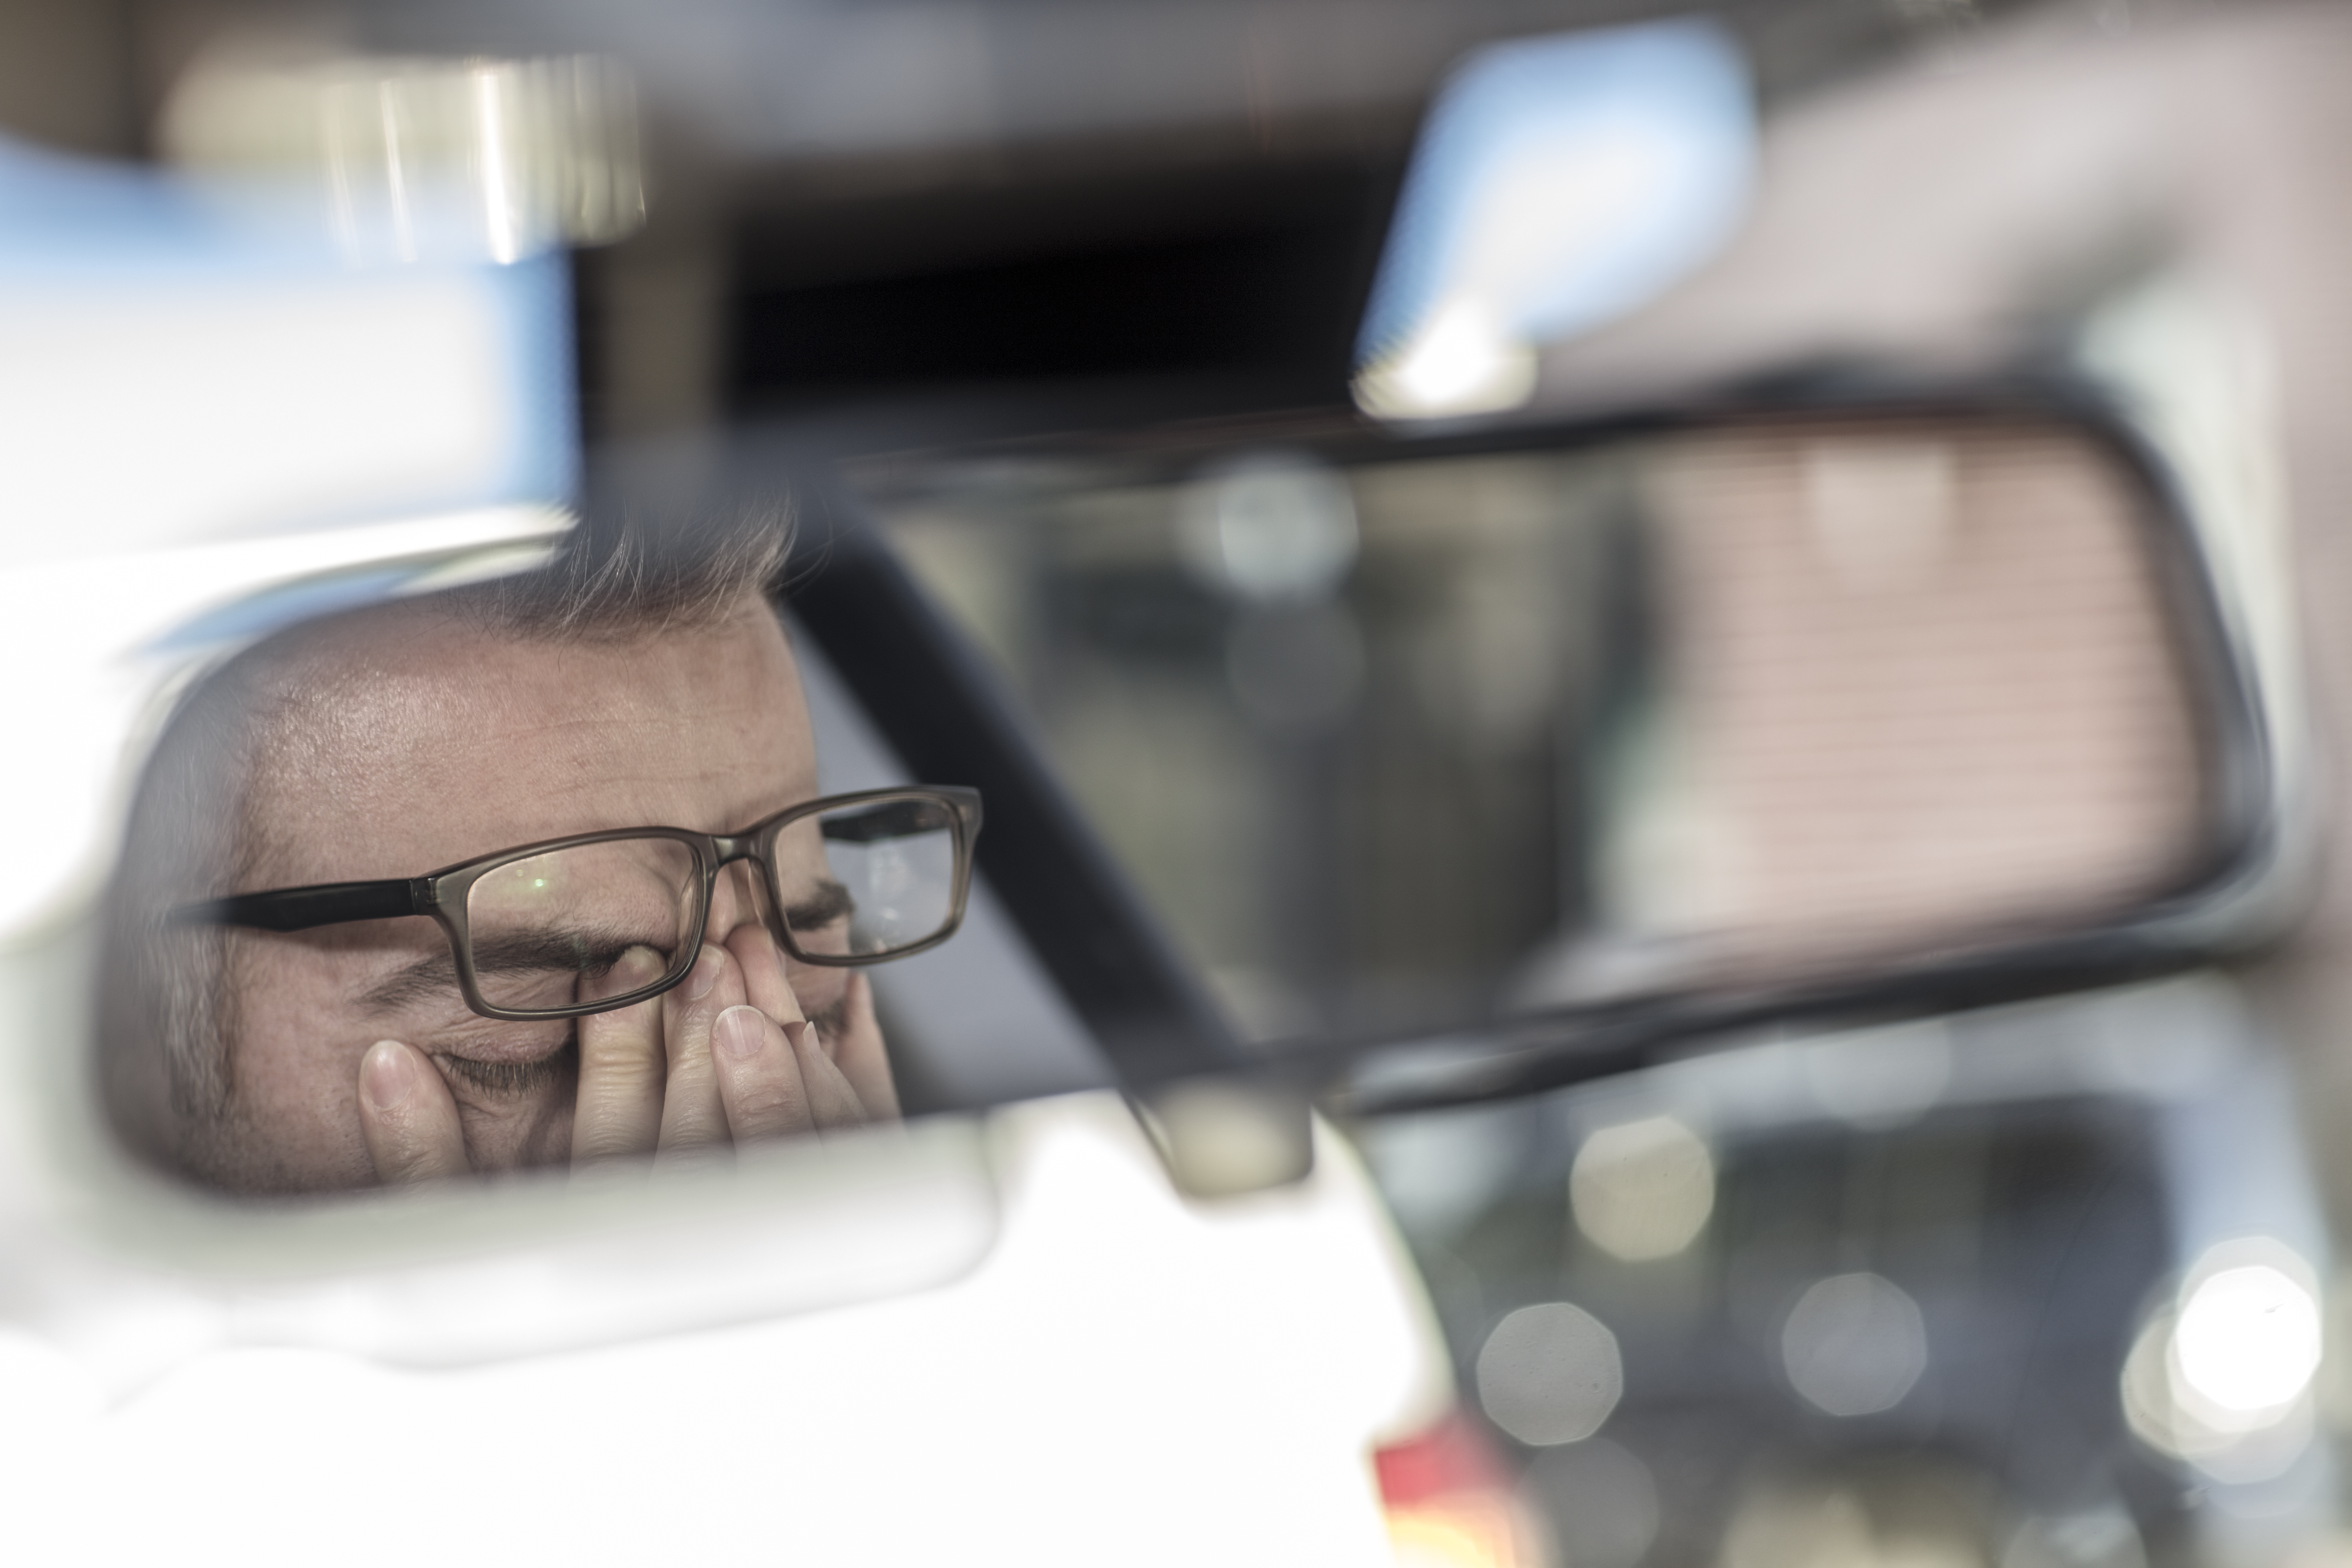 man with glasses rubbing his eyes in the rear view mirror of a vehicle